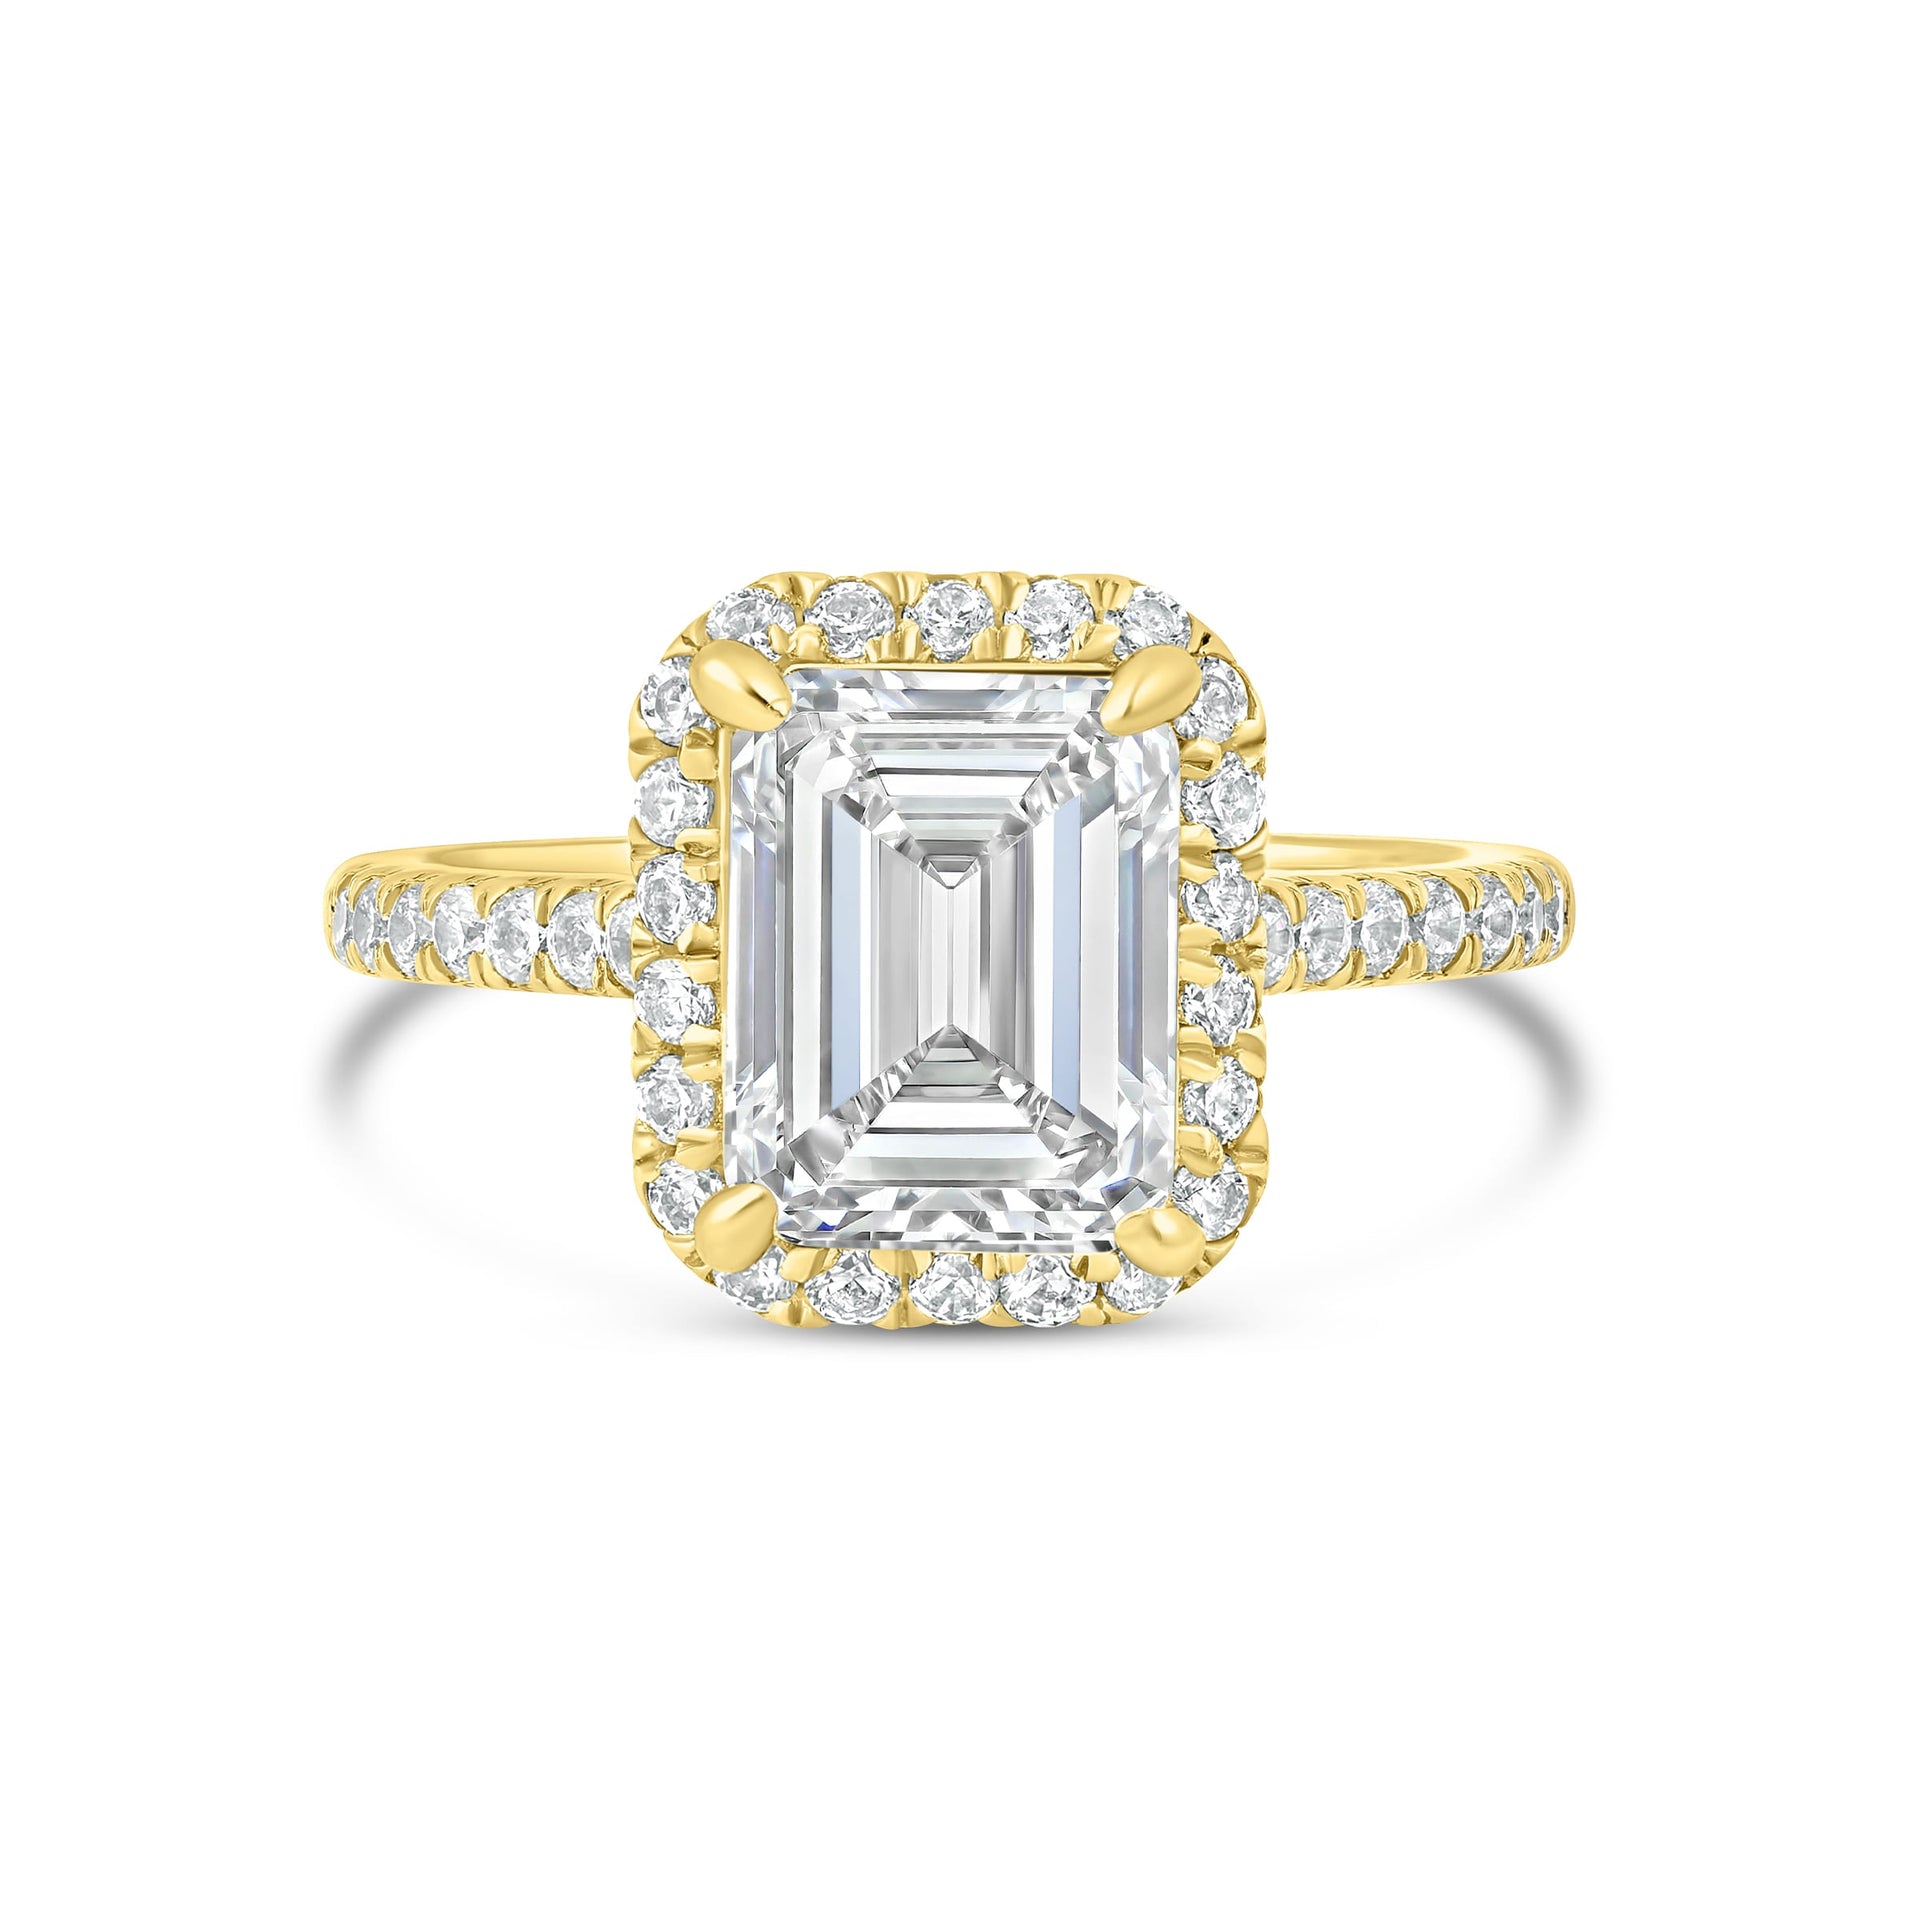 Gold 3 carat emerald cut engagement ring with half eternity band detailing